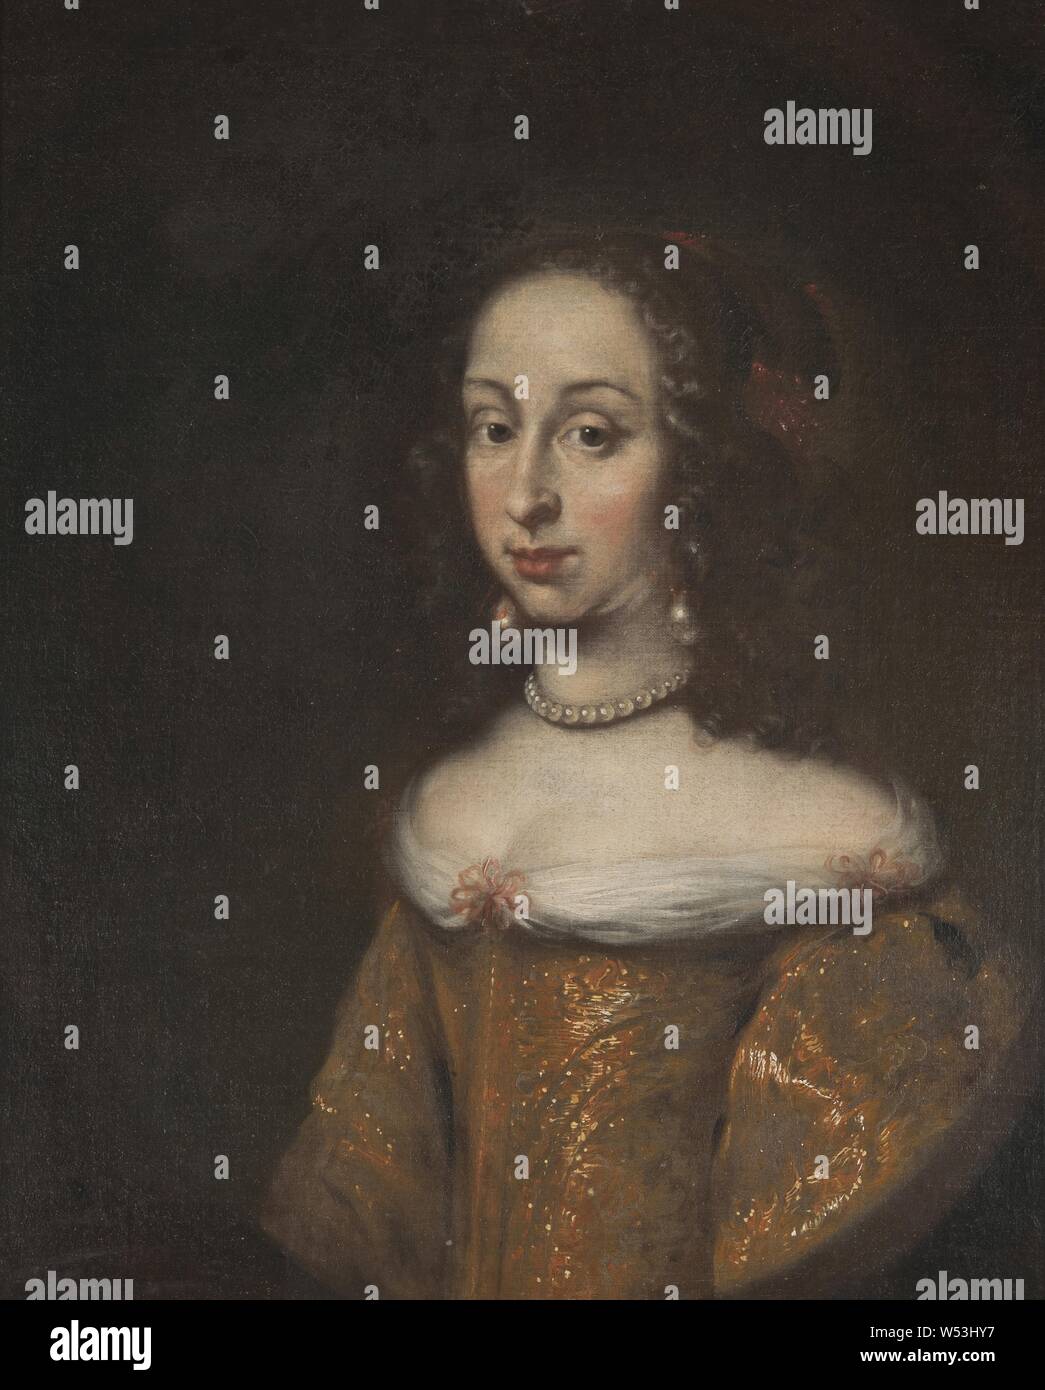 Jürgen Ovens, Queen Hedvig Eleonora, Hedvig Eleonora, 1636-1715, Princess of Holstein-Gottorp, Queen of Sweden, painting, portrait, Hedvig Eleonora of Holstein-Gottorp, oil on canvas, Height, 69 cm (27.1, inch), Width, 56 cm (22 inches), Signed, Ovens Stock Photo